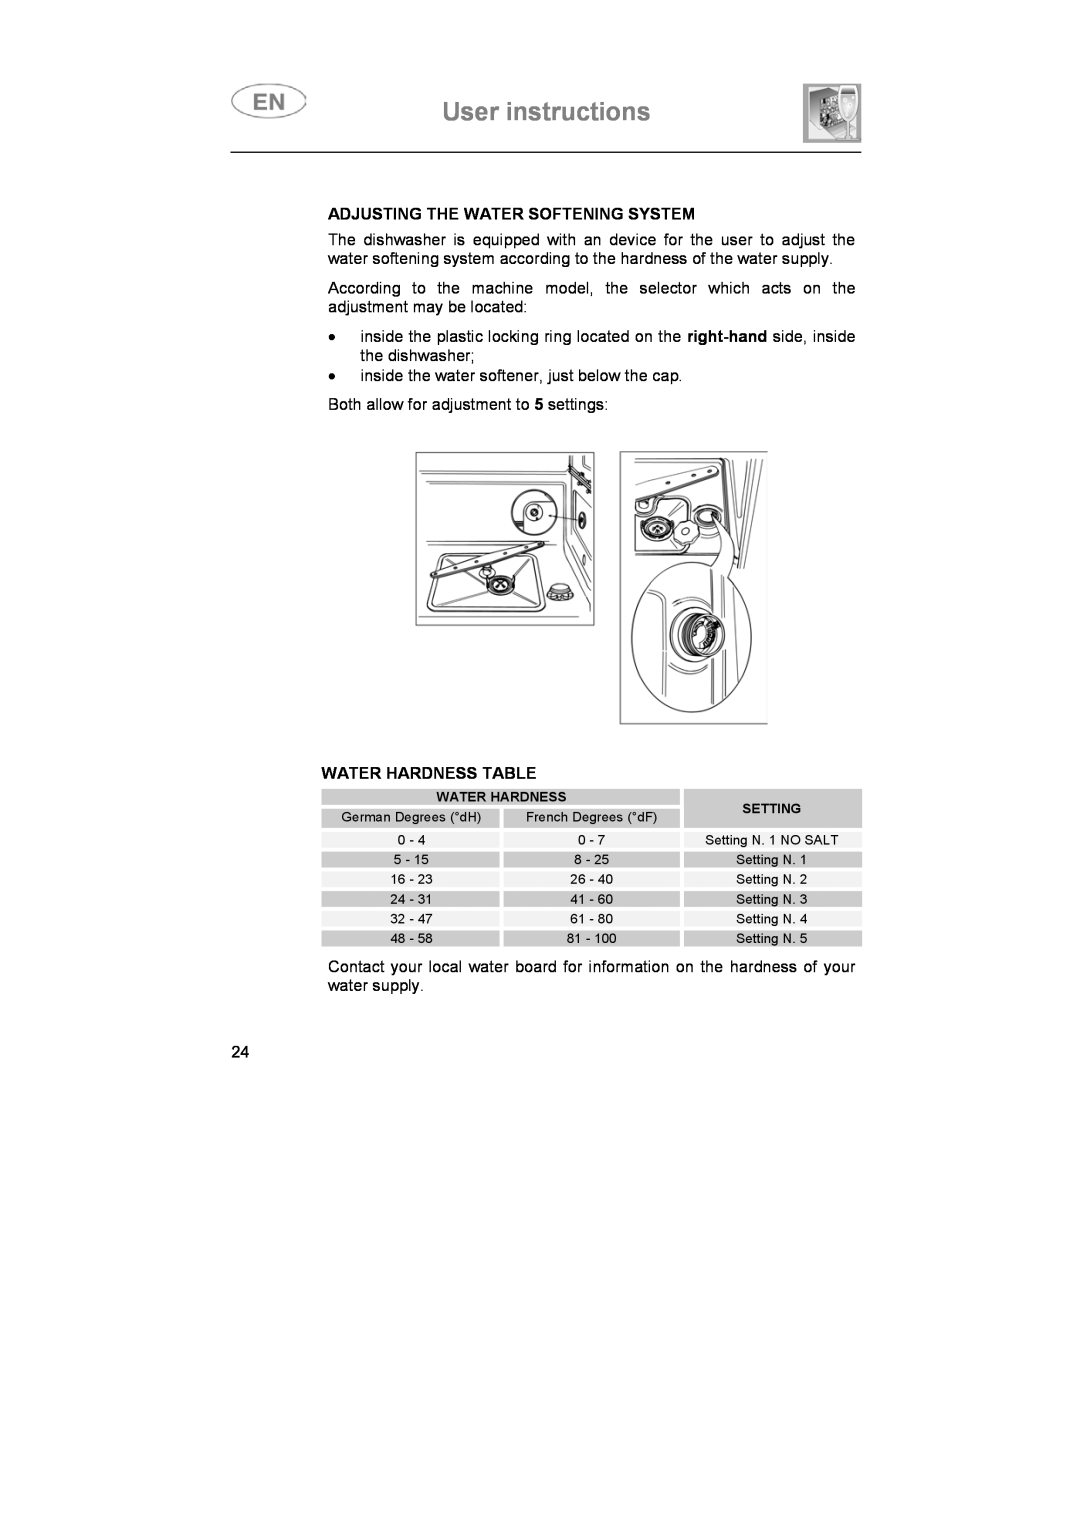 Smeg LS6147XH7 instruction manual User instructions, Adjusting The Water Softening System, Water Hardness Table 